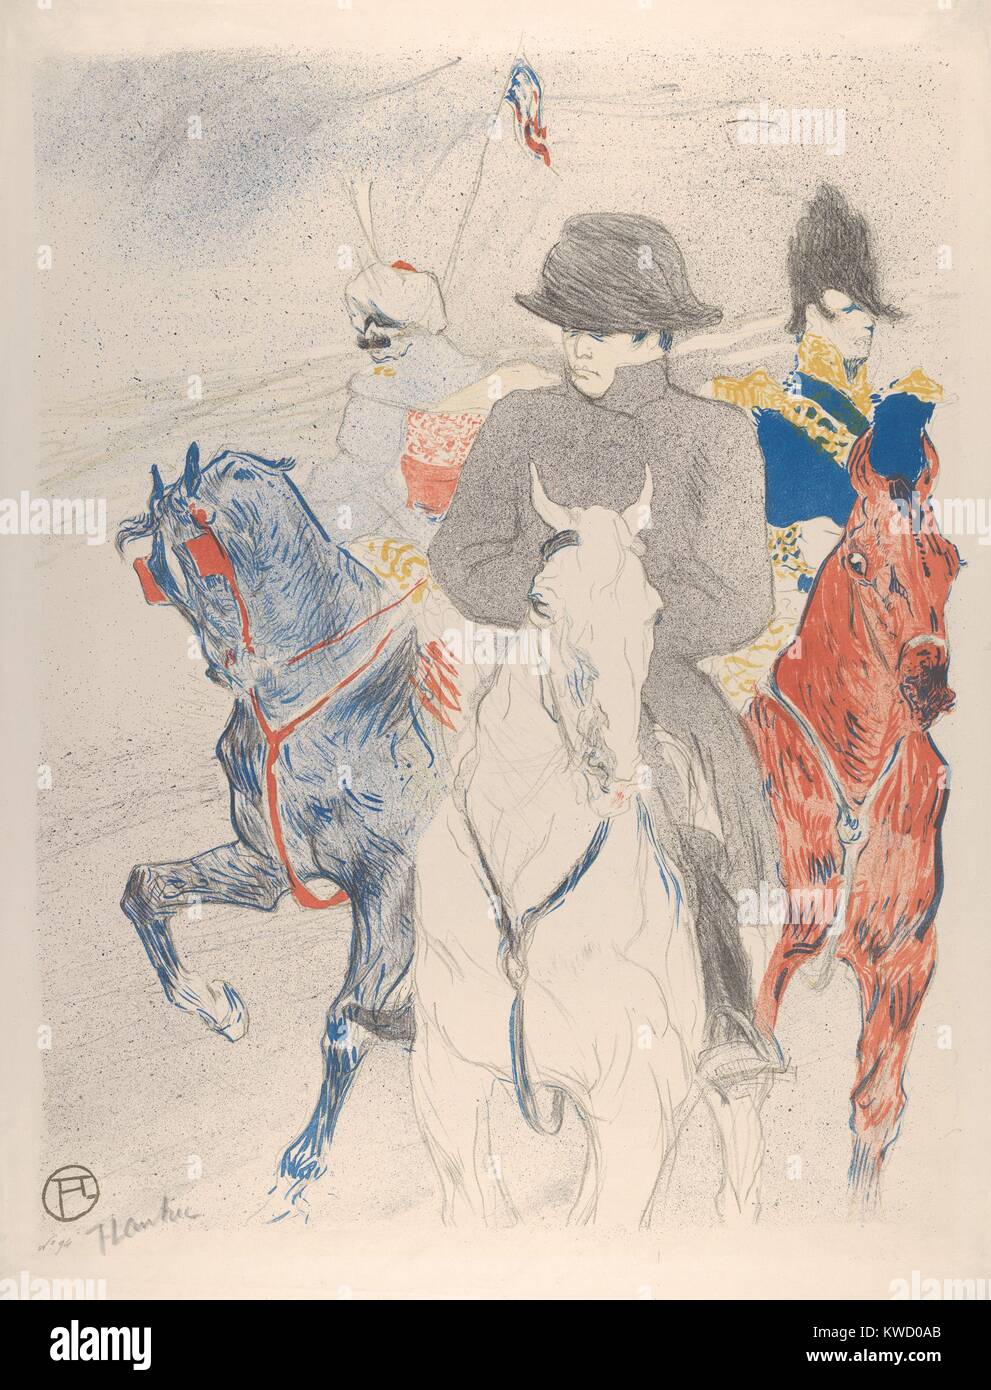 Napoleon, by Henri de Toulouse-Lautrec, 1895, French Post-Impressionist print. This lithograph is based on a drawing Lautrec submitted in a competition to advertise a biography of Bonaparte. After Lautrecs drawing won 3rd place, he made a fine art editio (BSLOC 2017 5 77) Stock Photo